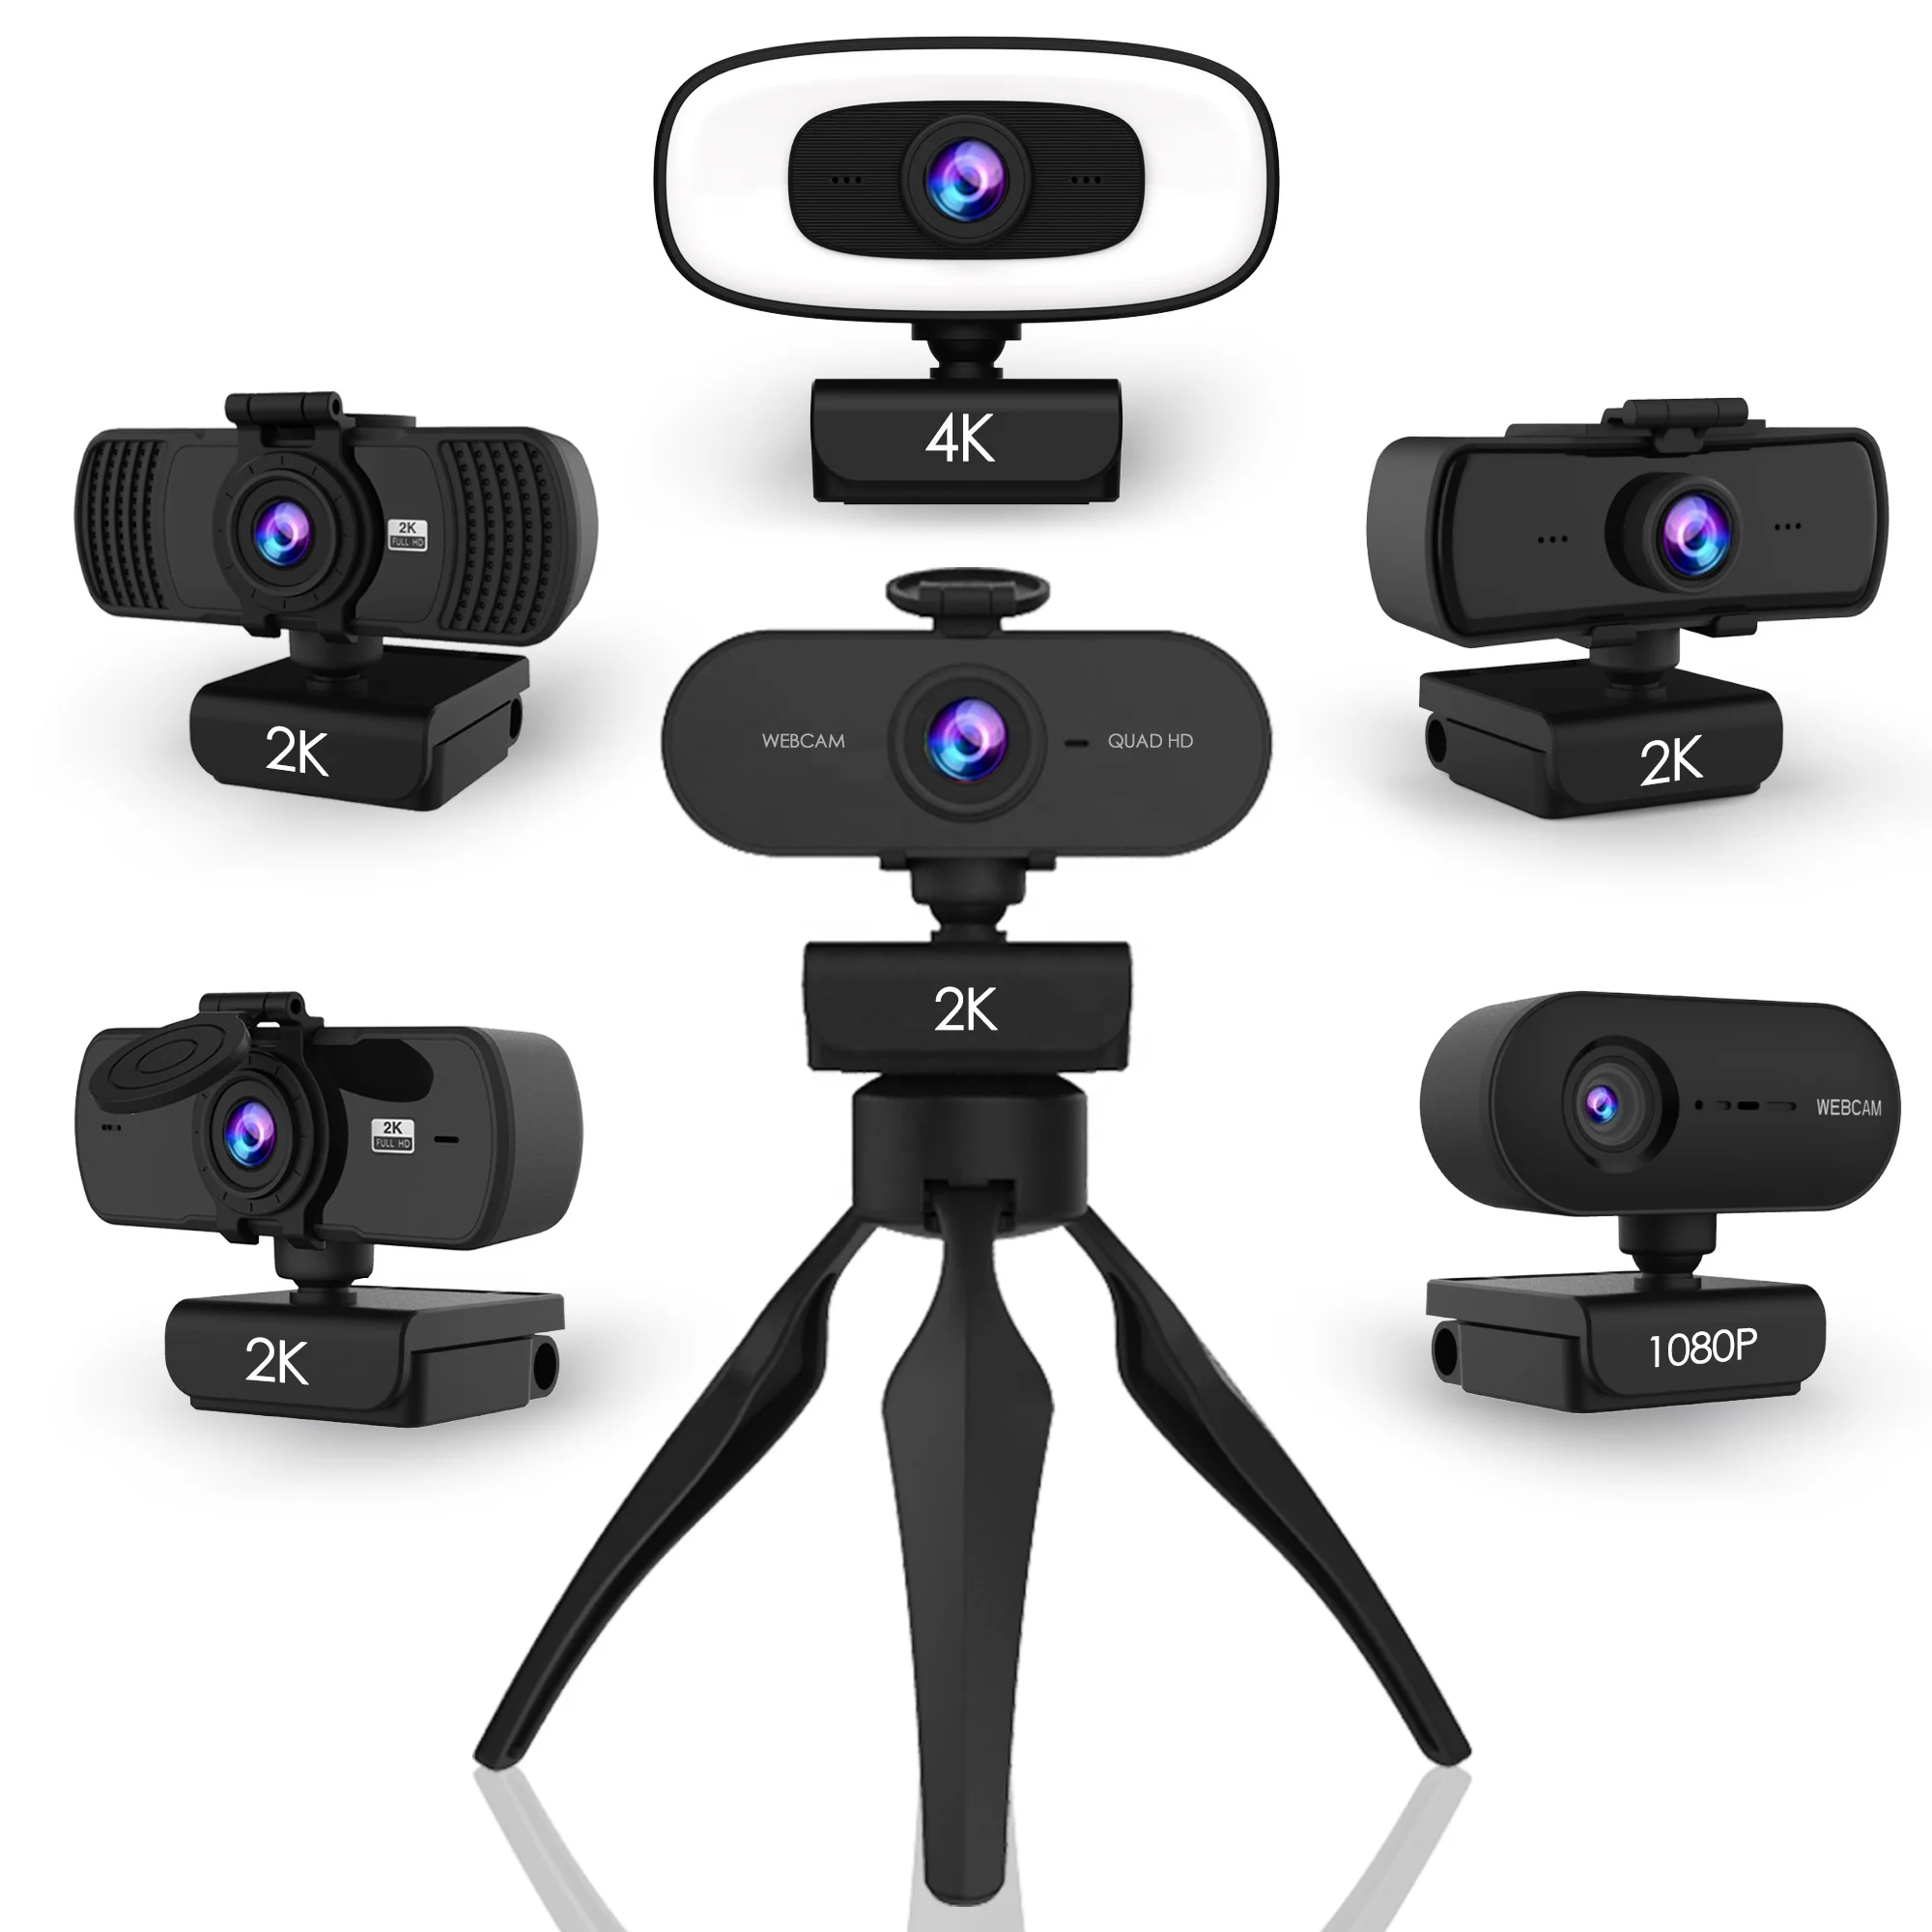 

Webcam USB HD 1080p Camera Web Cam With Microphone Webcam 2K for Skype Computer Tripod Laptop PC Streaming Conference Autofocus